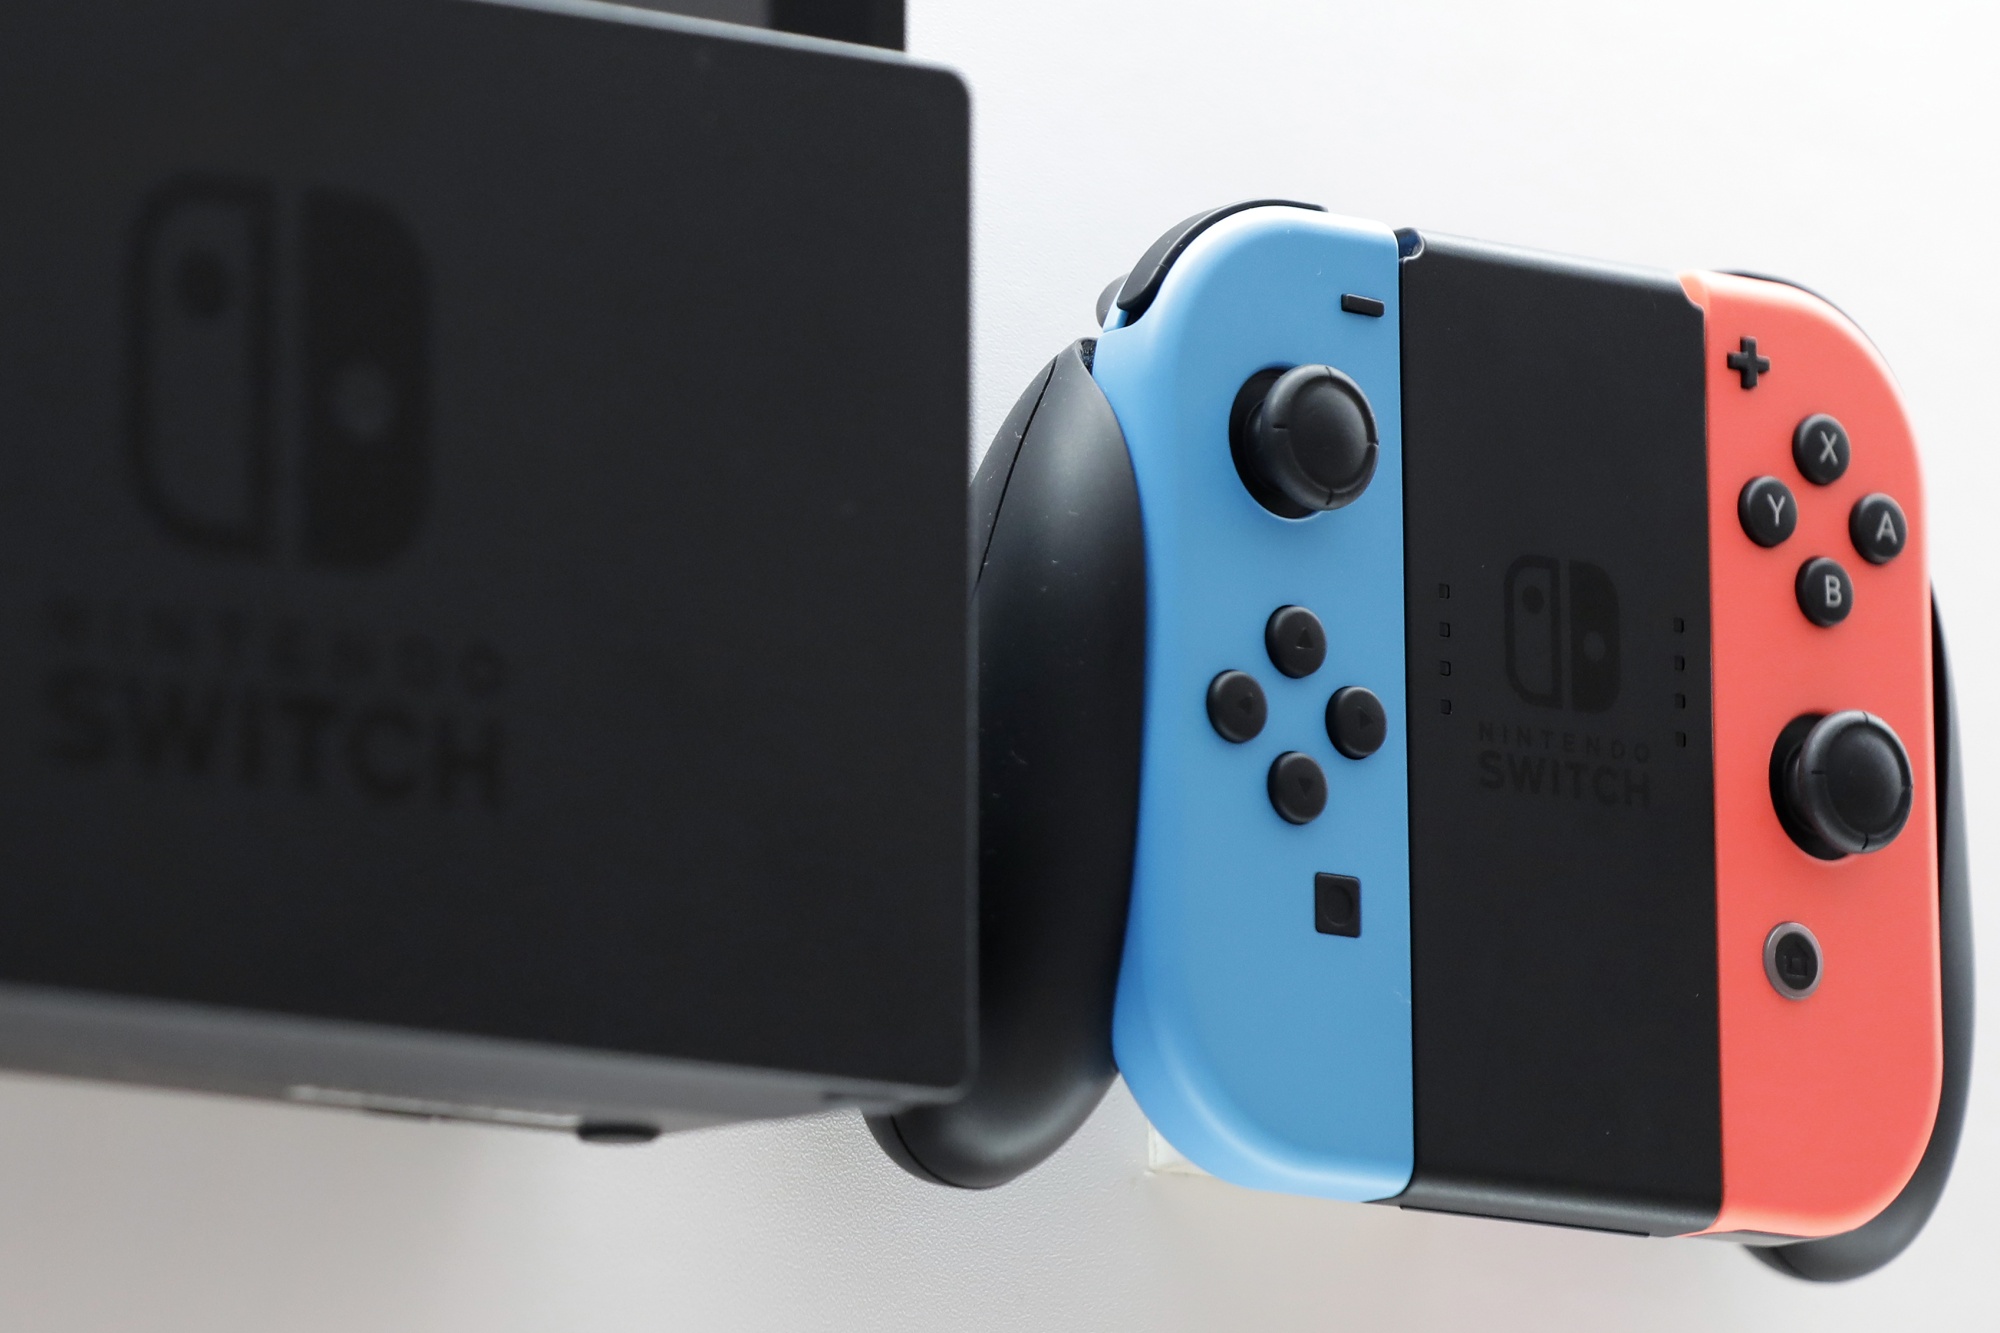 iphone deals with nintendo switch